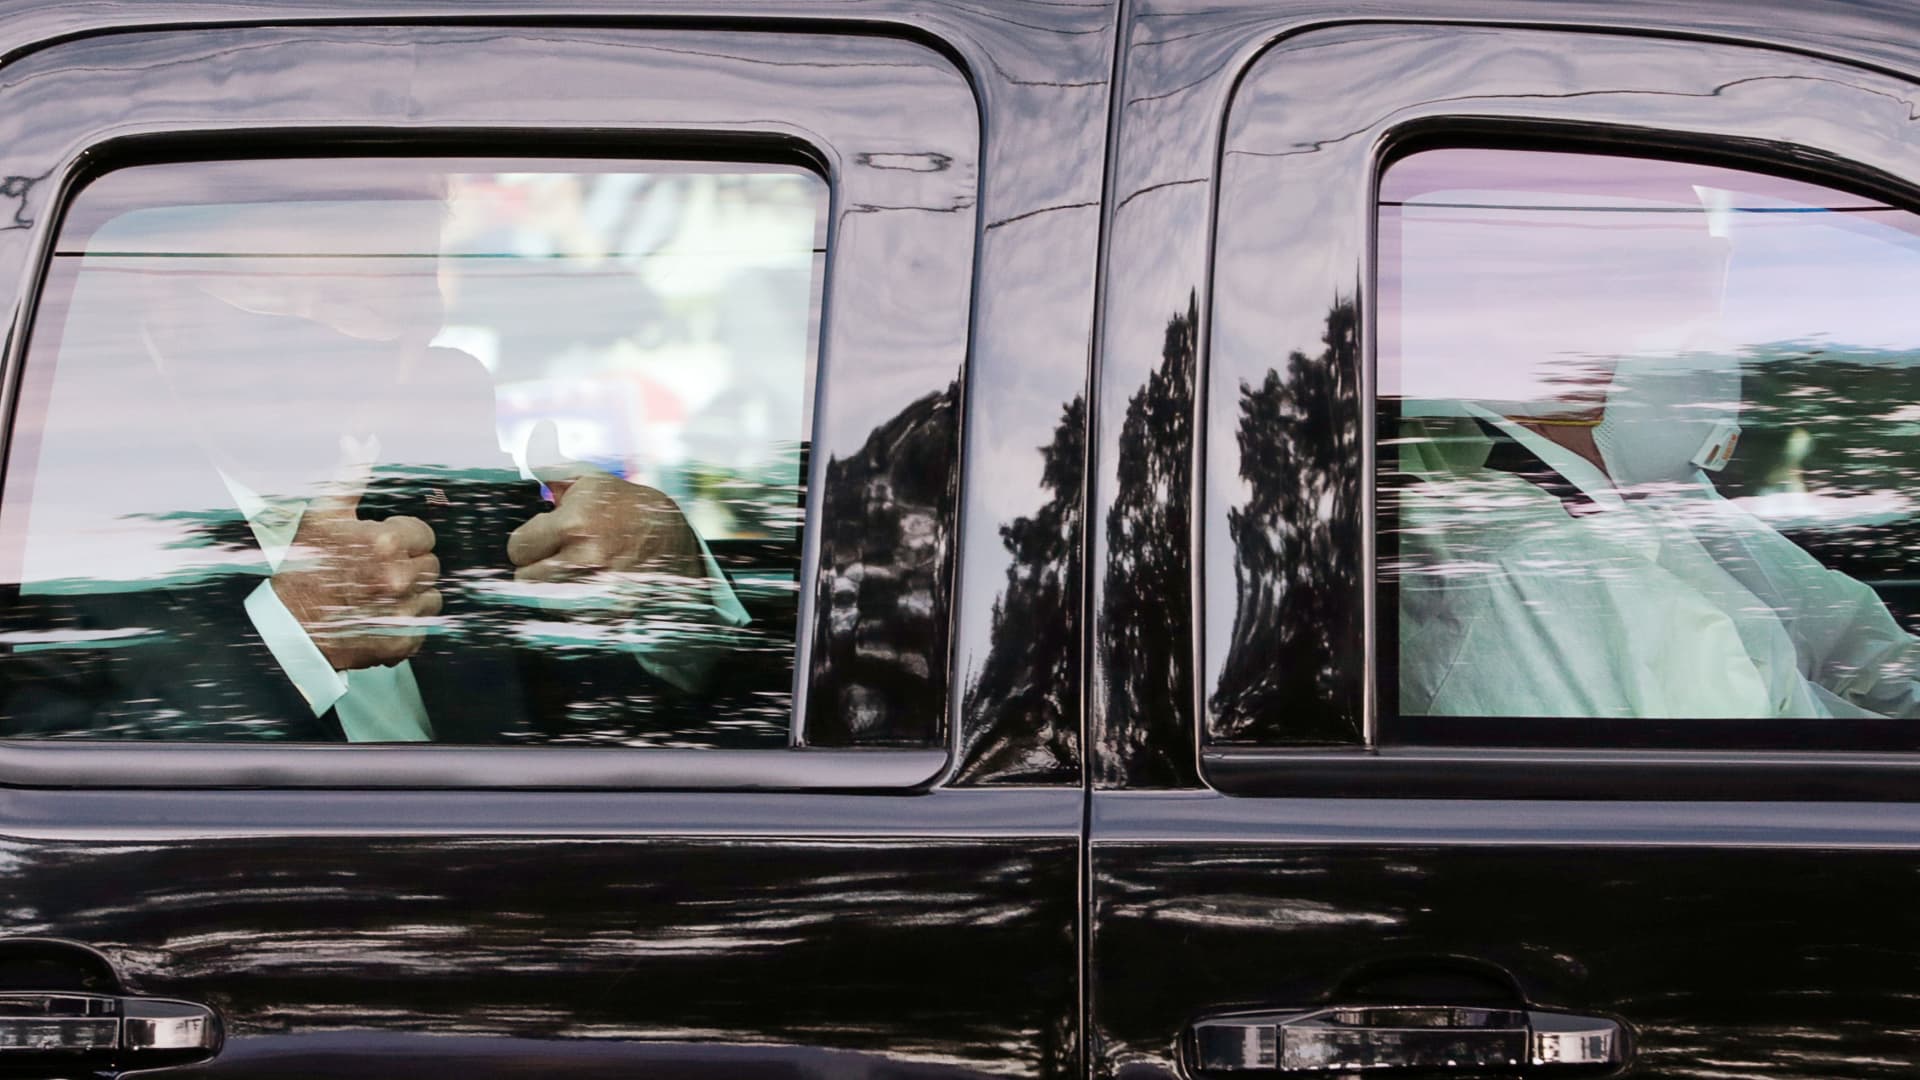 U.S. President Donald Trump gives two thumbs up to supporters as he rides in the presidential SUV with two U.S. Secret Service agents wearing medical protective masks, goggles and protective gowns in the front seat as they drive past the front of Walter Reed National Military Medical Center, where he is being treated for coronavirus disease (COVID-19) in Bethesda, Maryland, U.S. October 4, 2020.